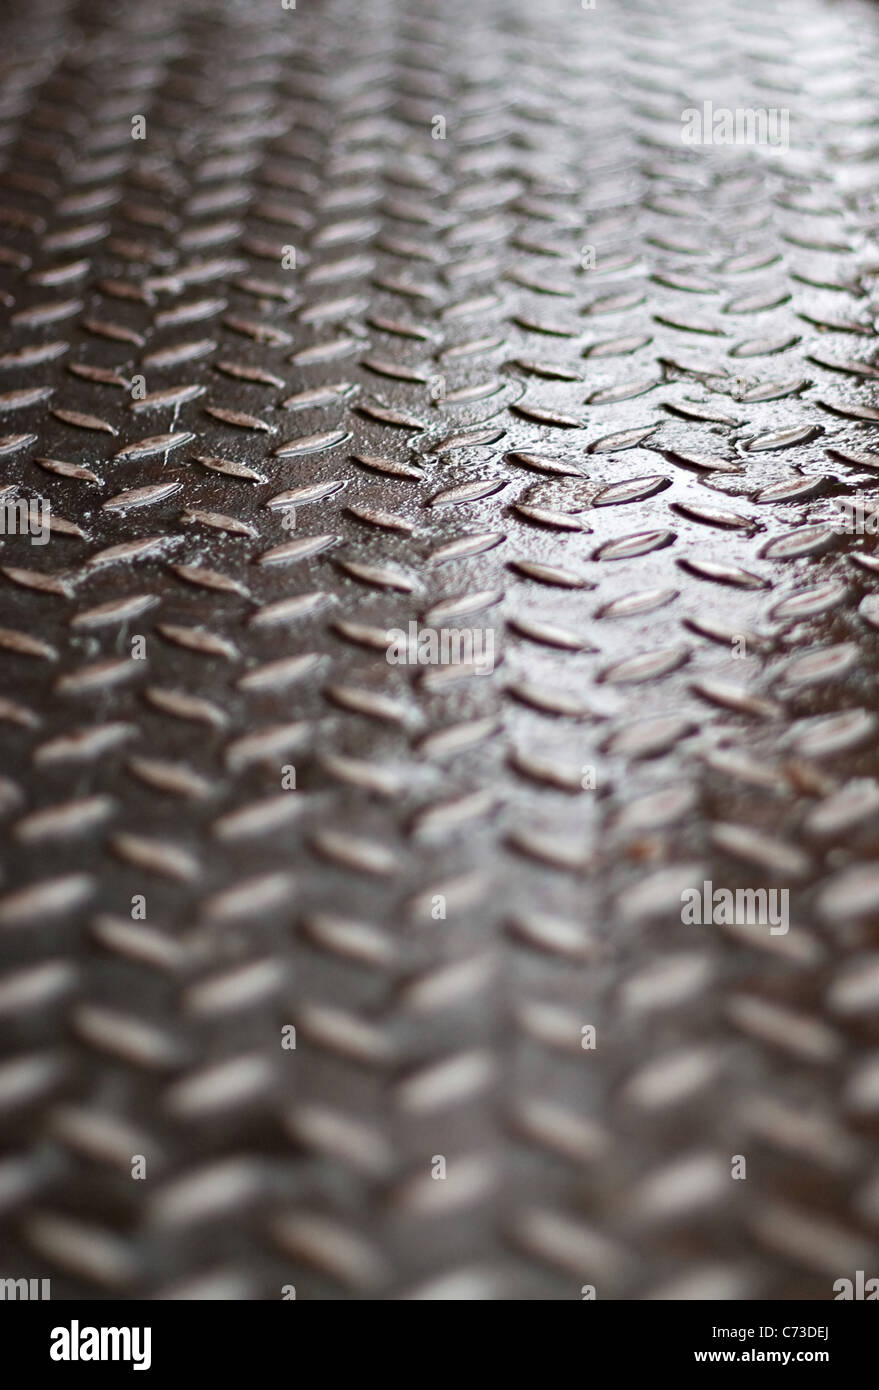 Closeup of real diamond plate material - super shallow depth of field. Stock Photo